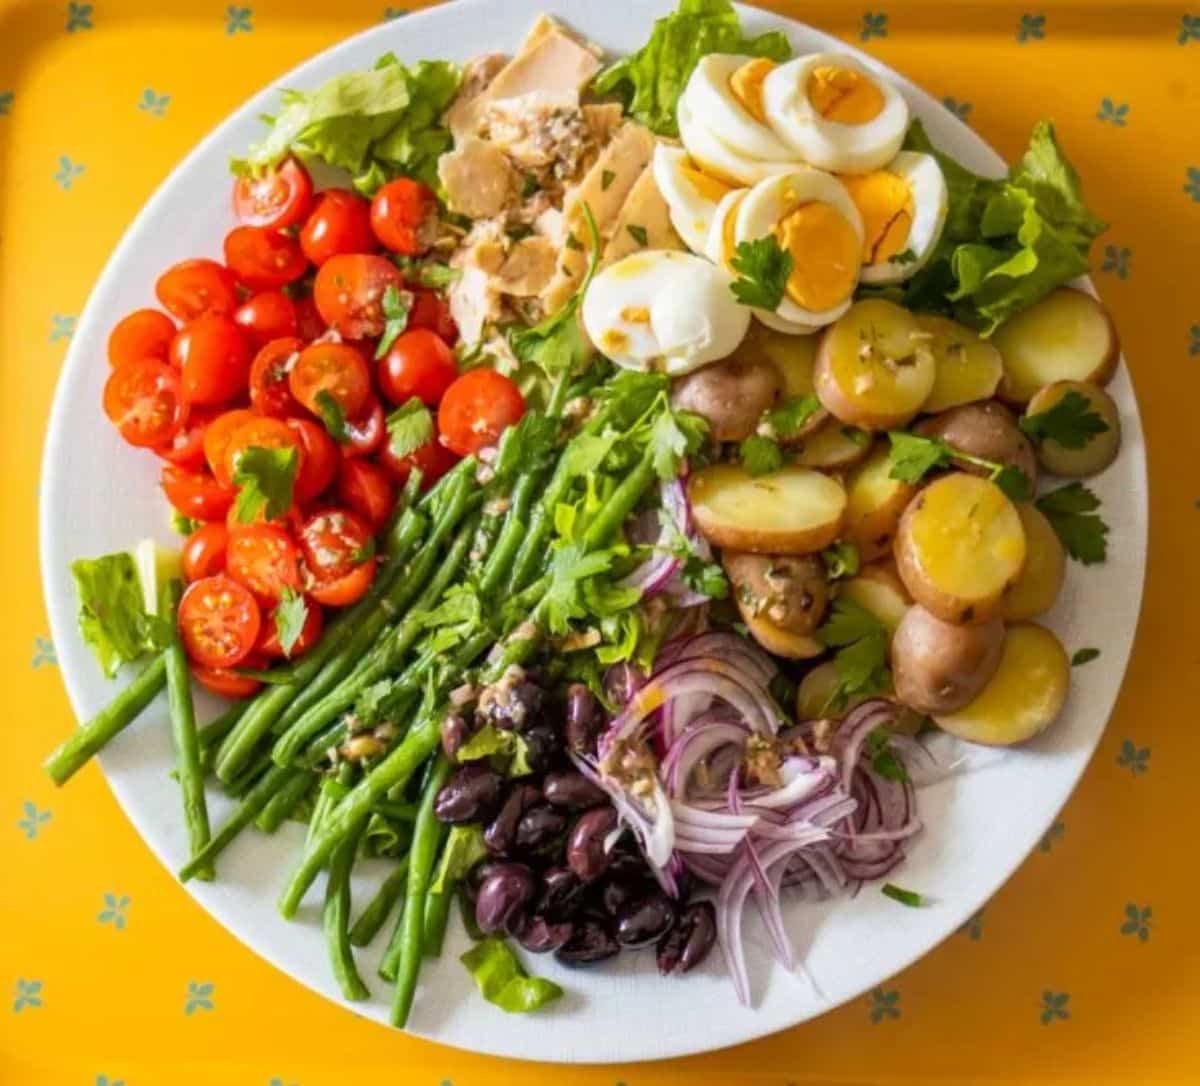 Healthy gluten-free Salade Nicoise on a white plate.